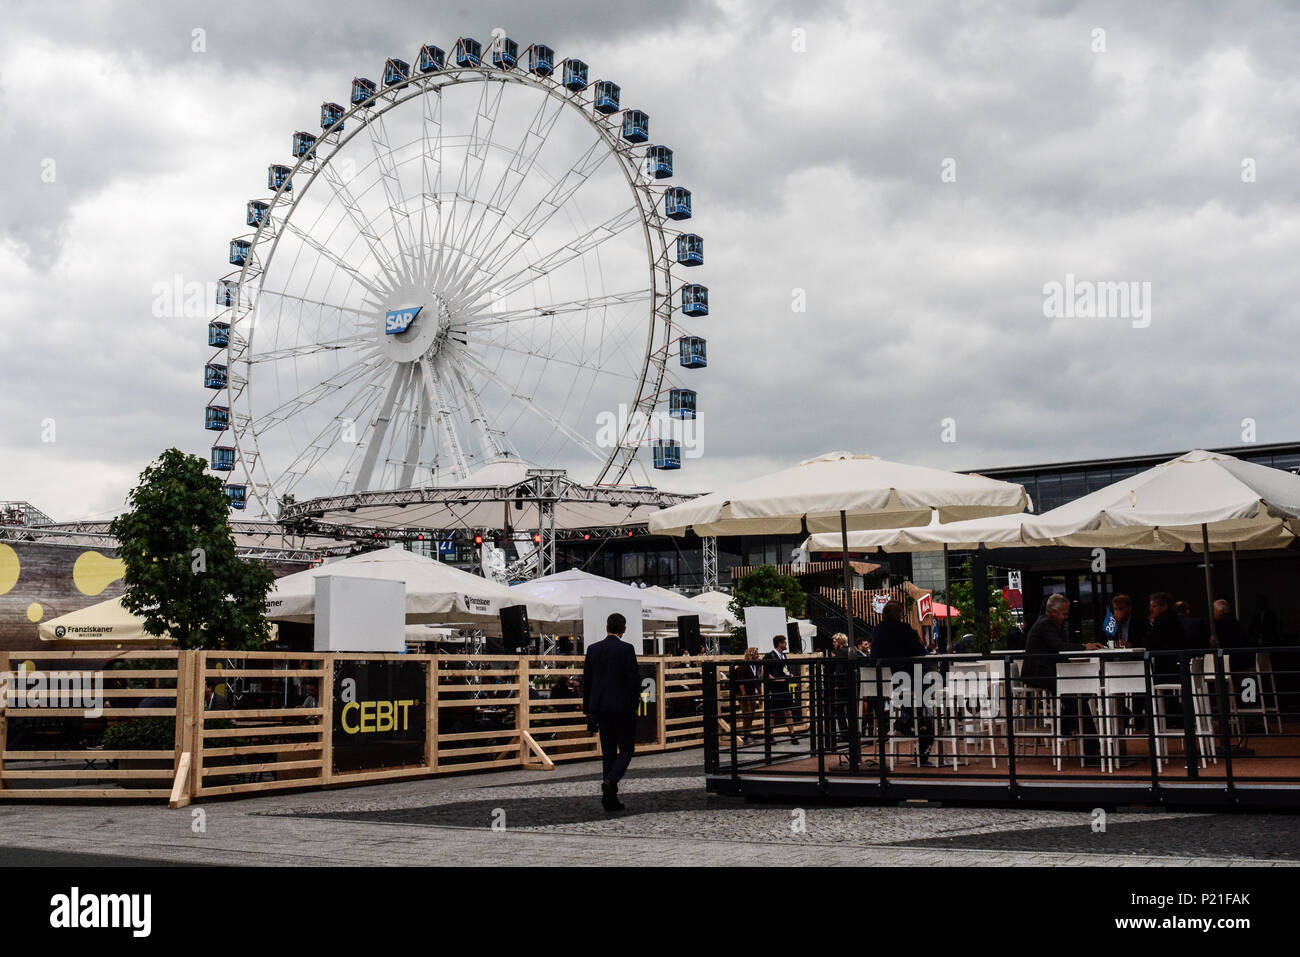 Hanover, Germany. 13th June, 2018. CeBIT (a German acronym for Centrum für Büroautomation, Informationstechnologie und Telekommunikation, "Center for Office Automation, Information Technology and Telecommunication") is the largest international computer expo, held annually on the Hanover fairground, Germany. It is considered a barometer of current trends and a measure of the state of the art in information technology. Credit: Laura Chiesa/Pacific Press/Alamy Live News Stock Photo